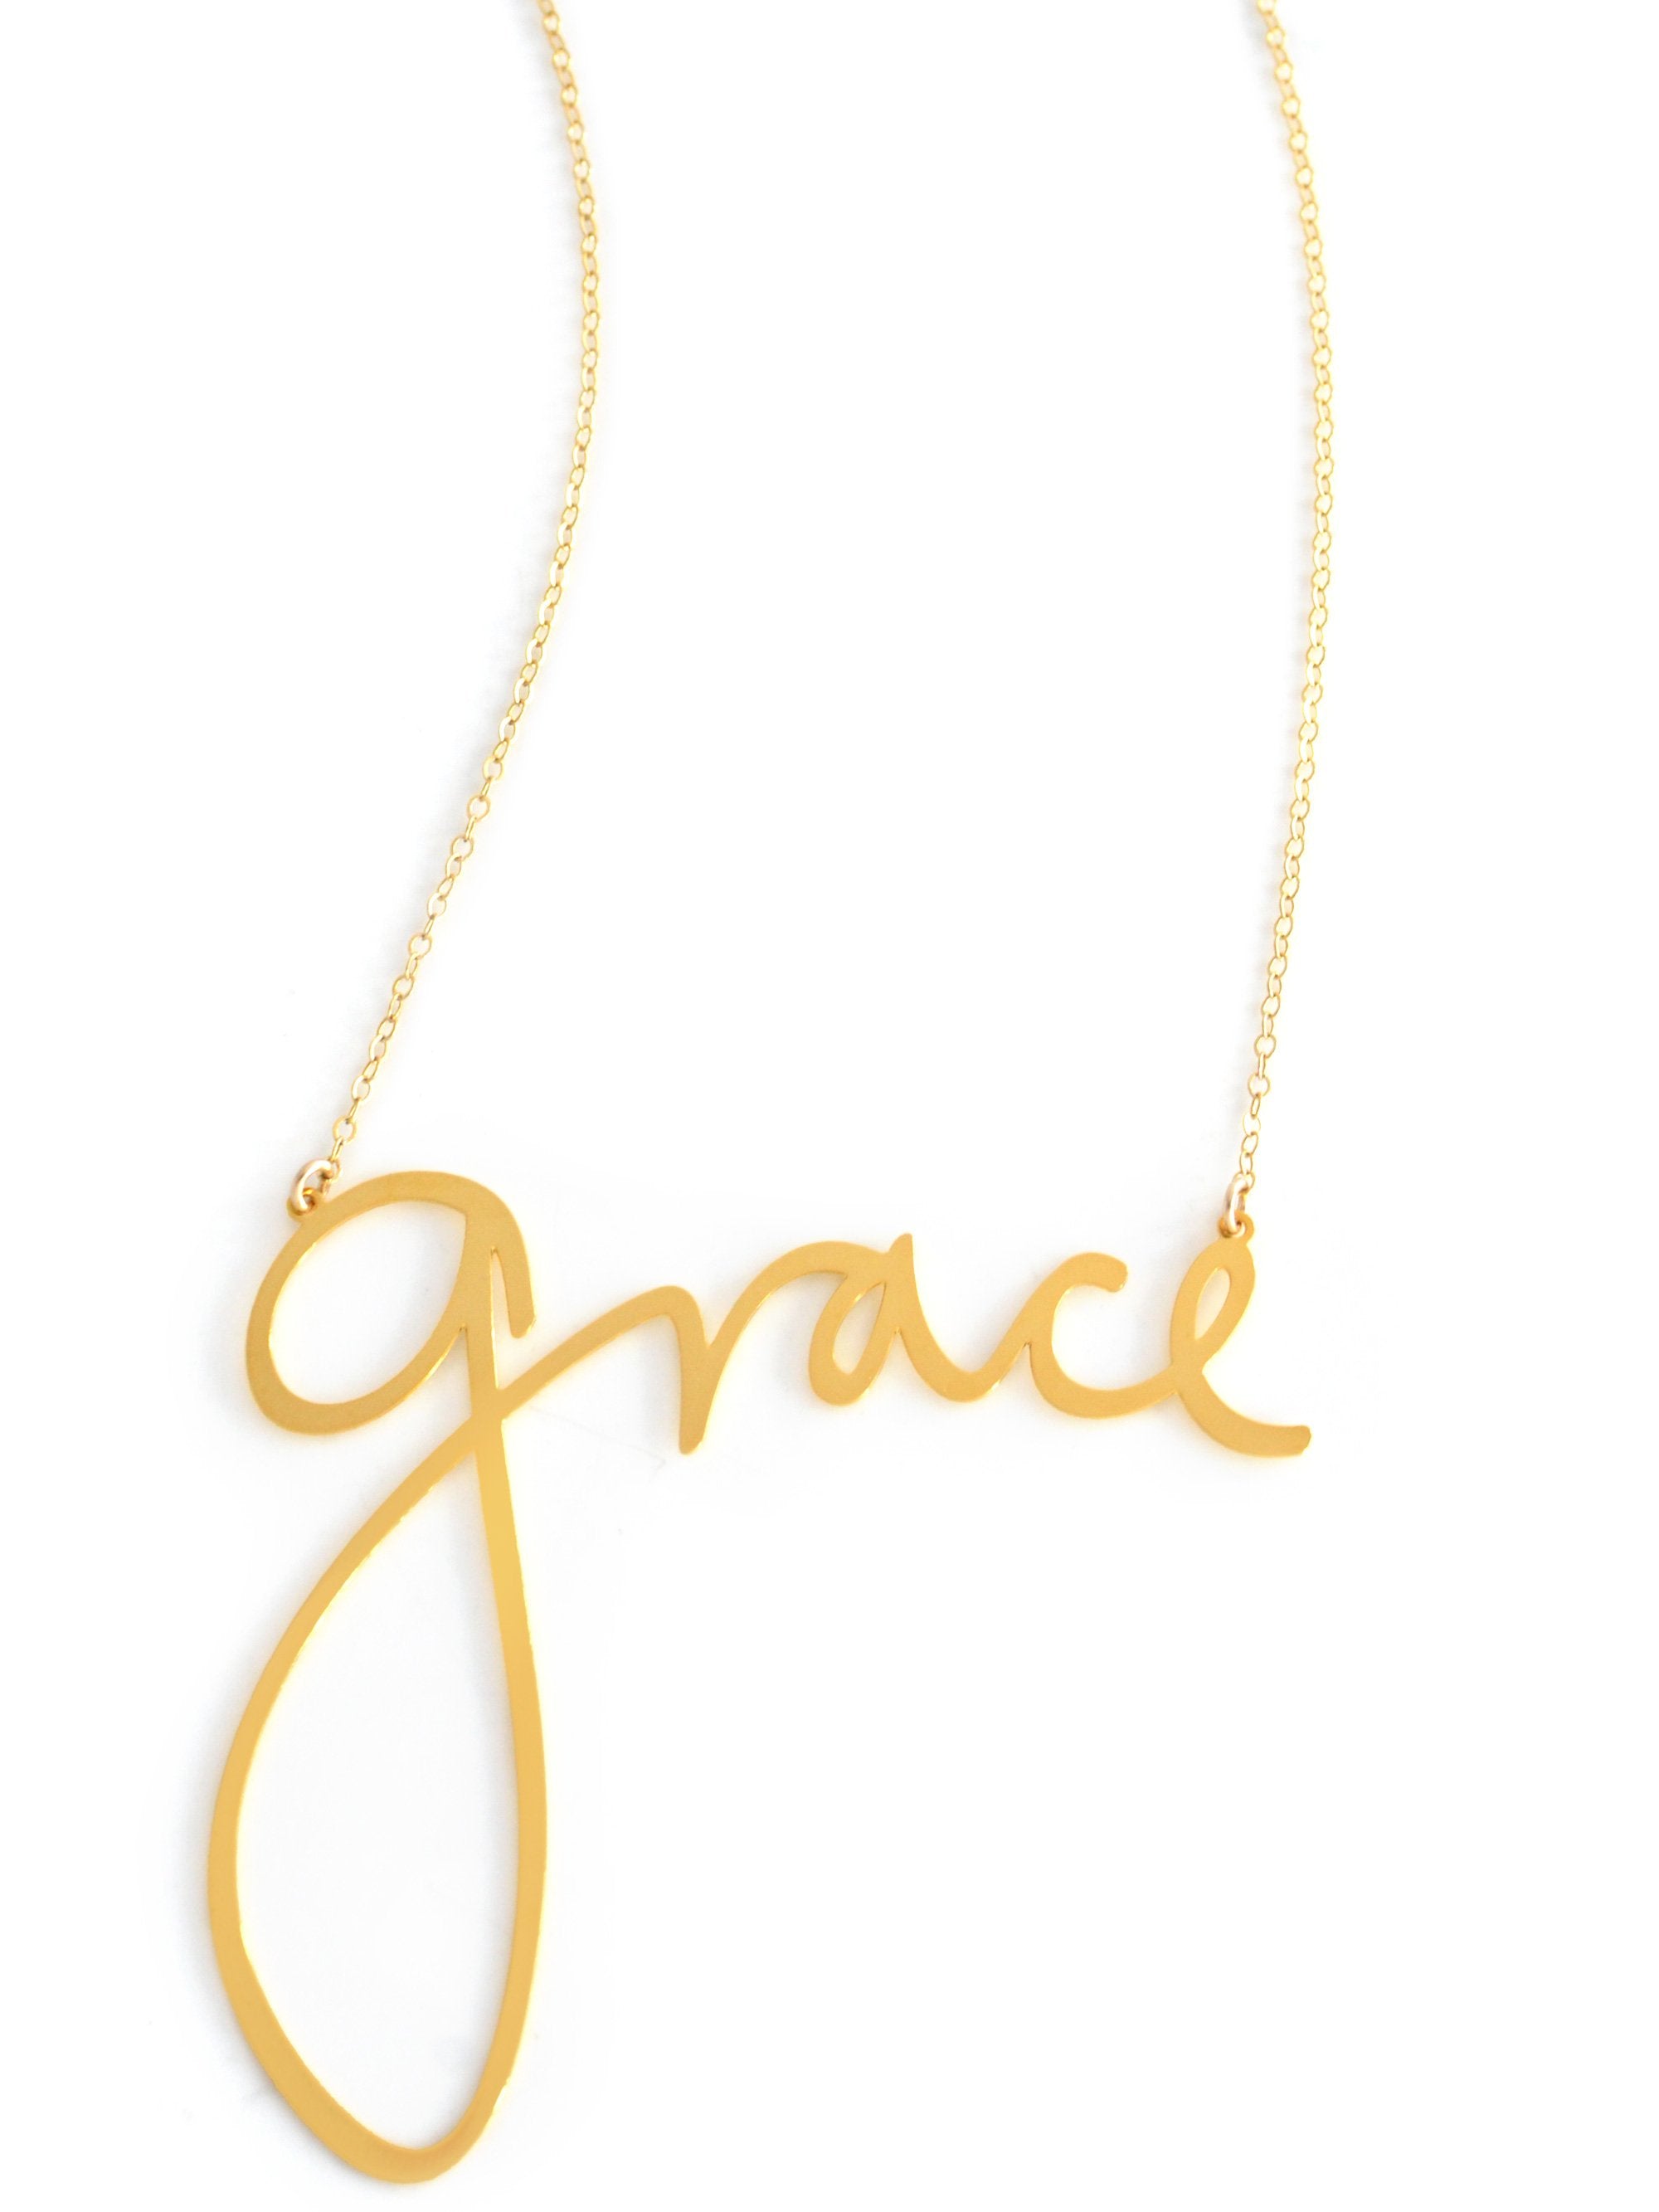 Grace Necklace - High Quality, Affordable, Hand Written, Self Love, Mantra Word Necklace - Available in Gold and Silver - Small and Large Sizes - Made in USA - Brevity Jewelry